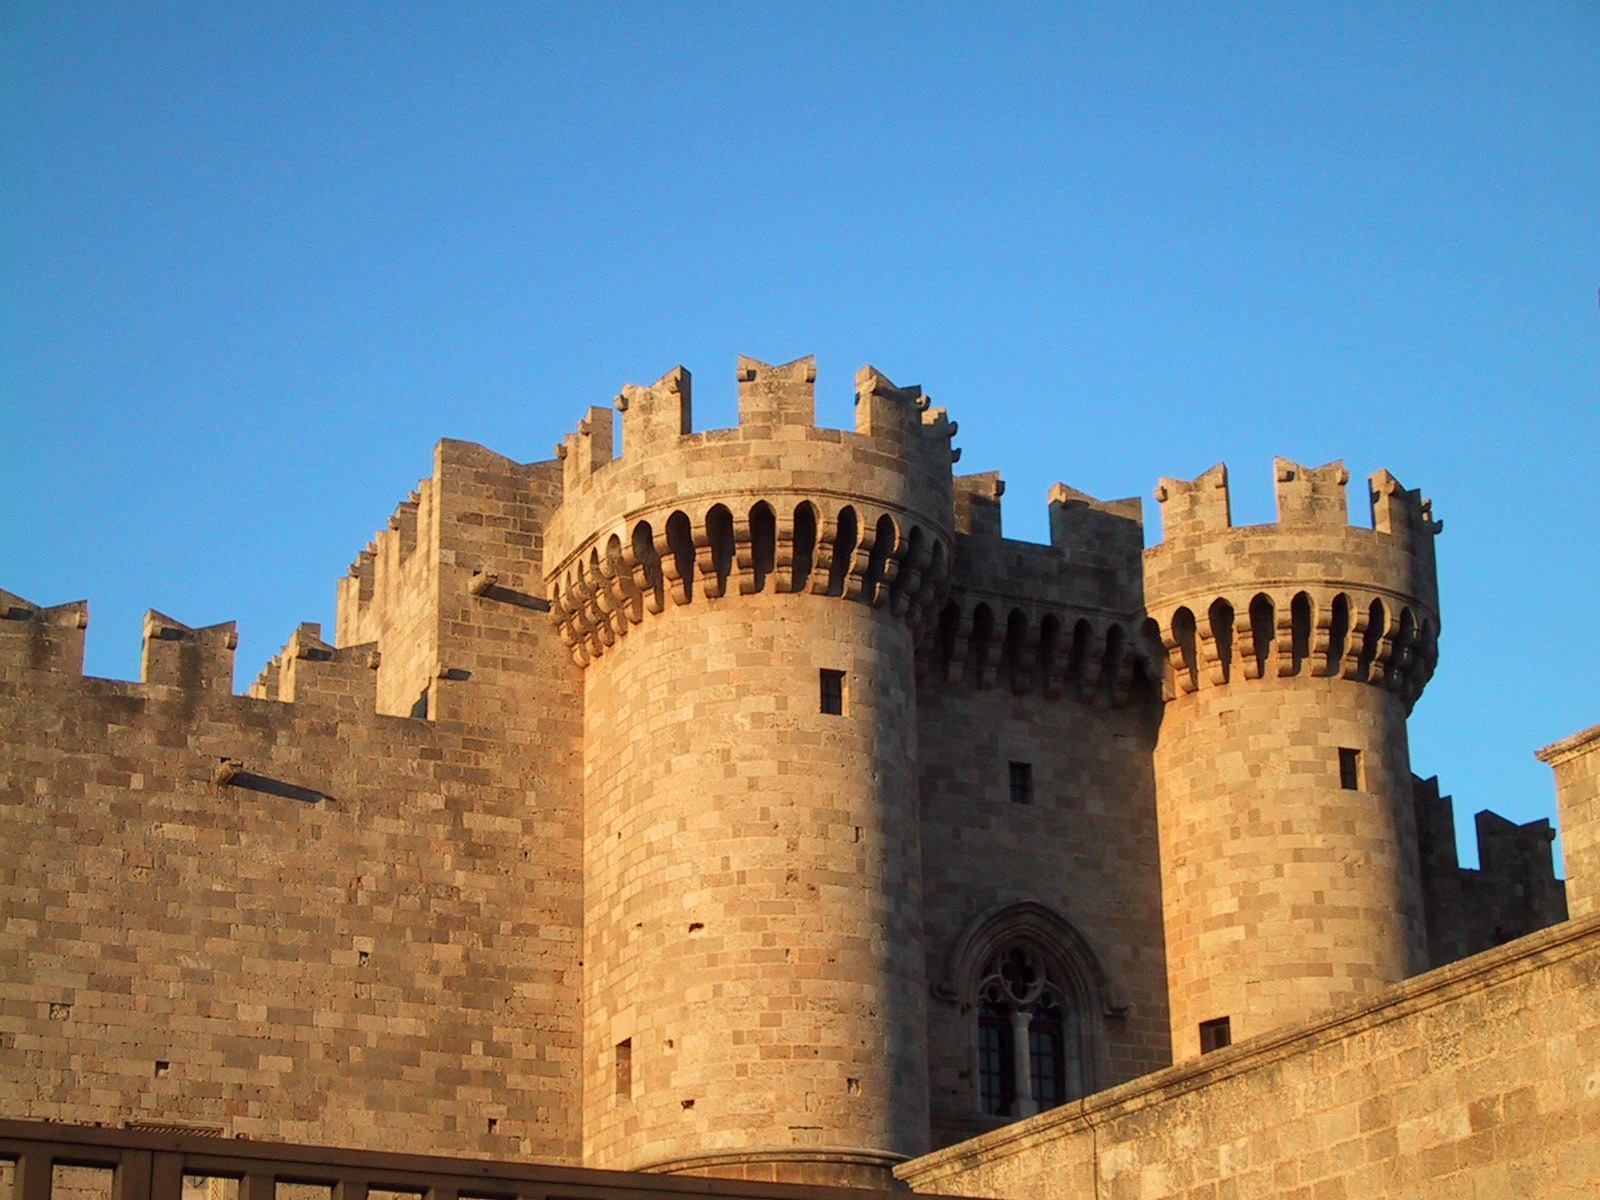 Sightseeing, Castles, The Grand Master's Palace in Rhodes island 